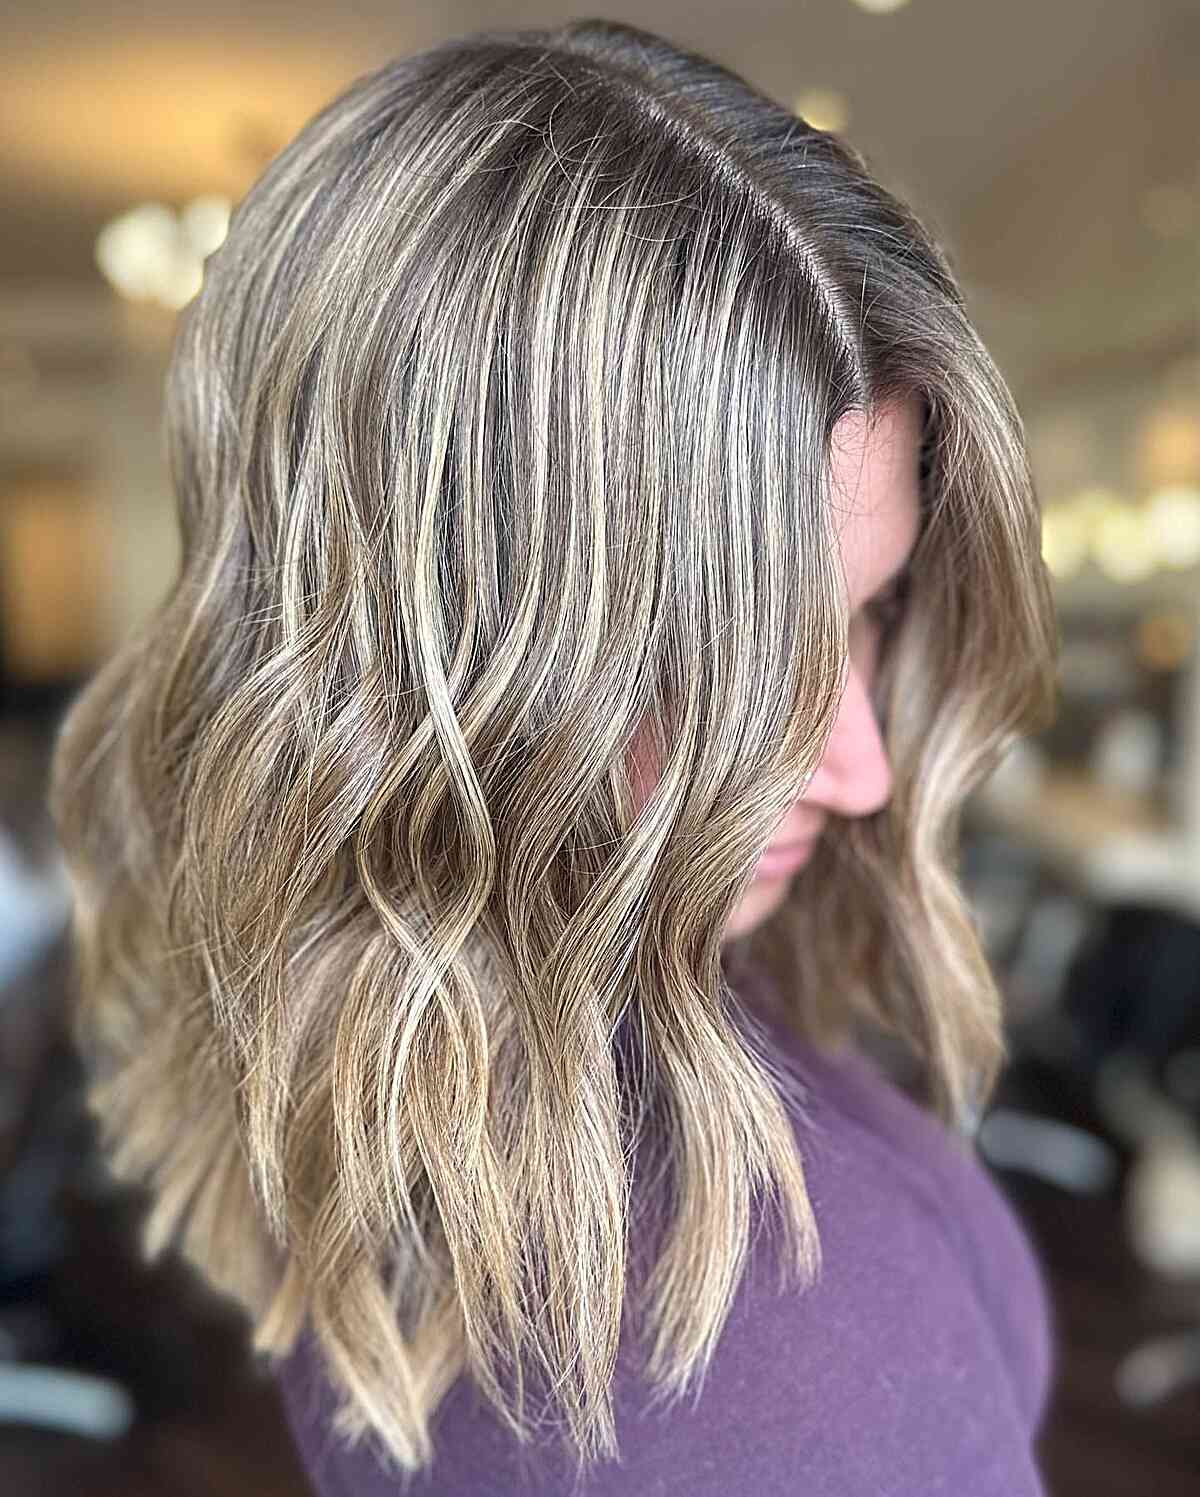 Medium Middle Part Layered Cut with Dirty Lived-in Blonde Balayage Hue